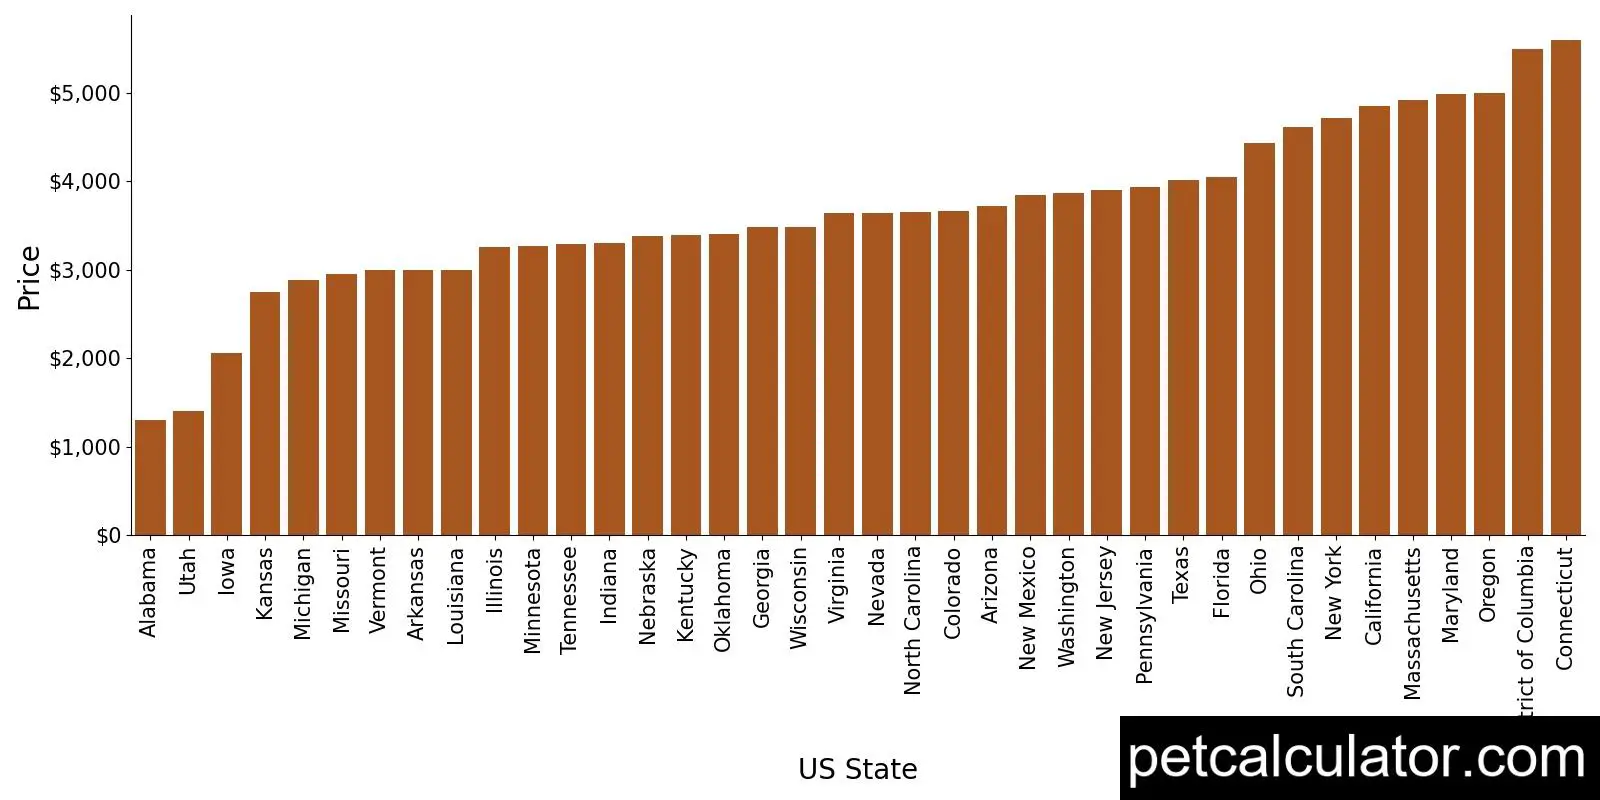 Price of Bulldog by US State 